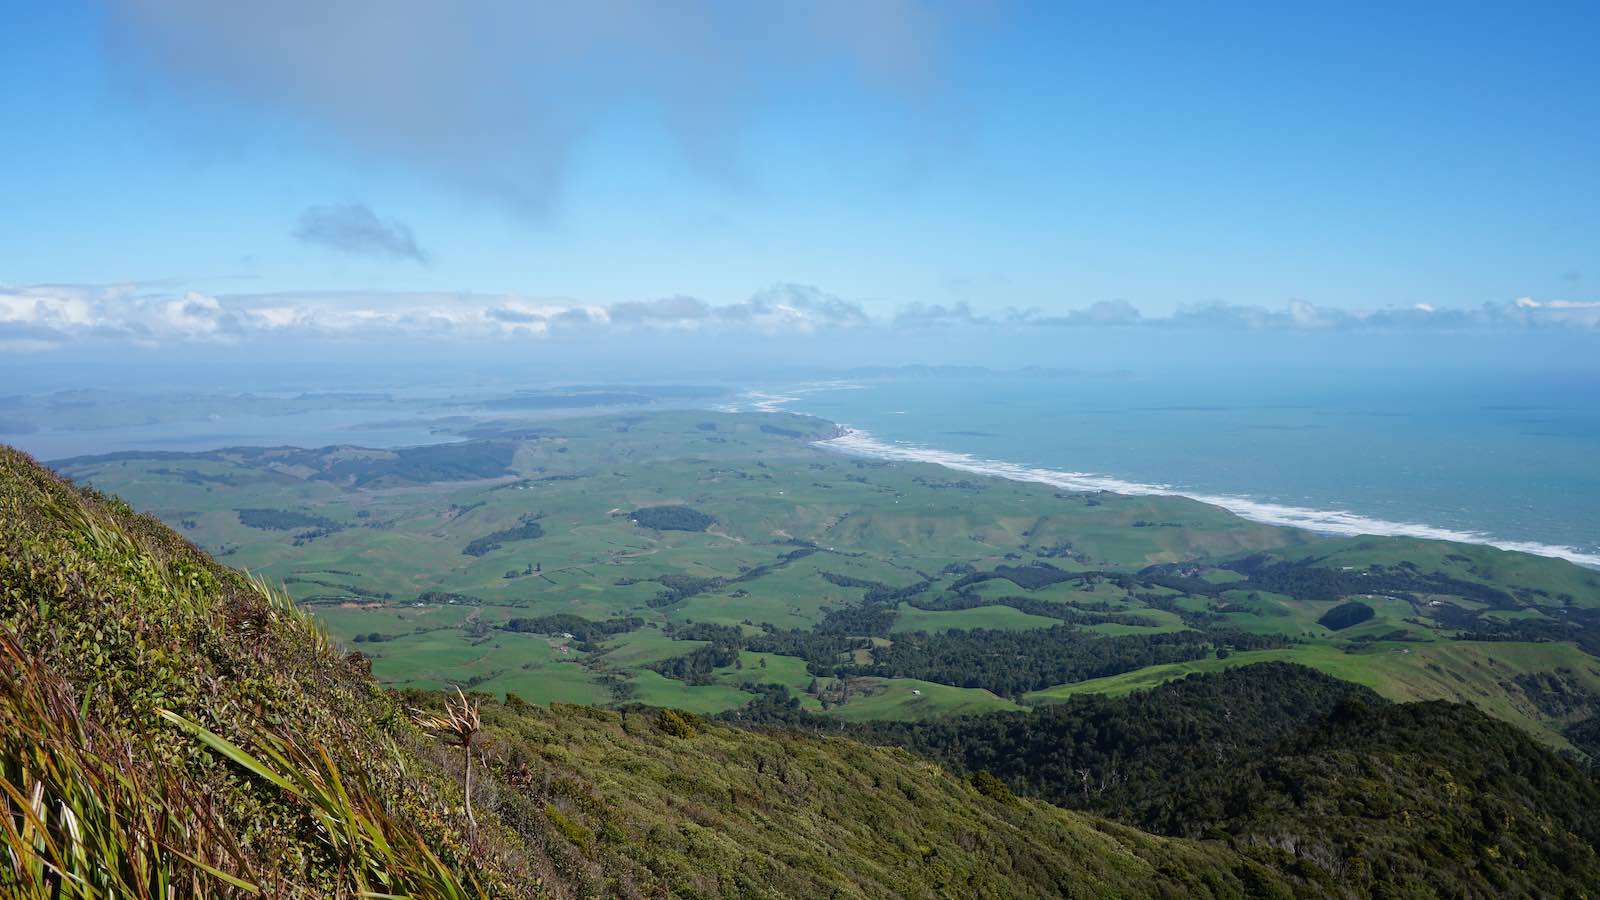 Still a long road ahead. I took this photo halfway up a dormant volcano outside of Raglan, New Zealand.